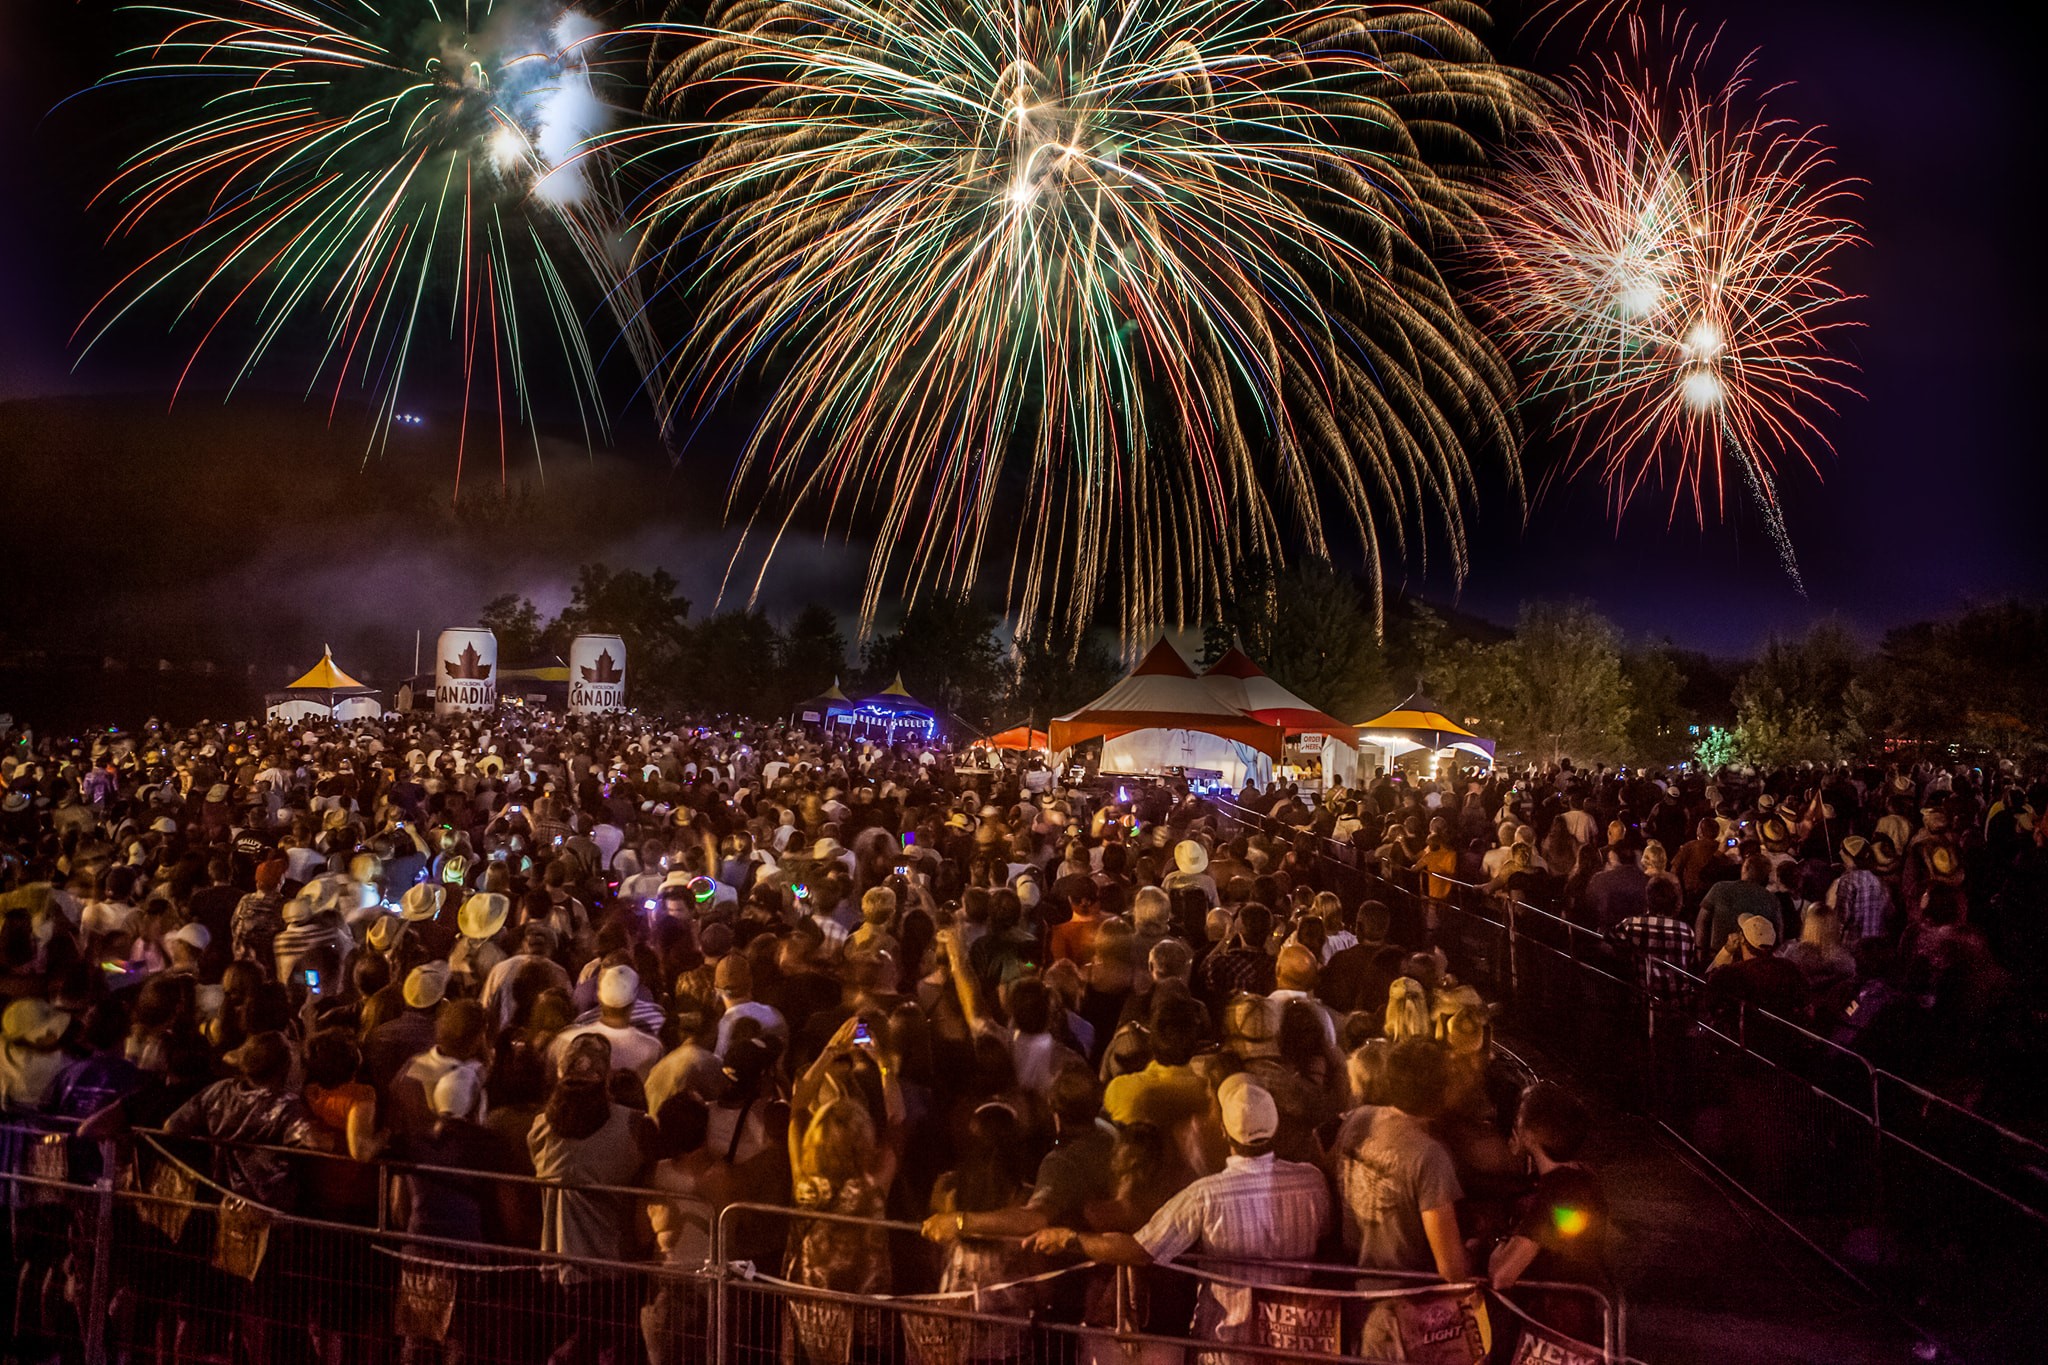 a giant outdoor crowd looks up at the huge blasts of the colourful fireworks display in the night sky above their heads at Mattawa Voyageur Days.